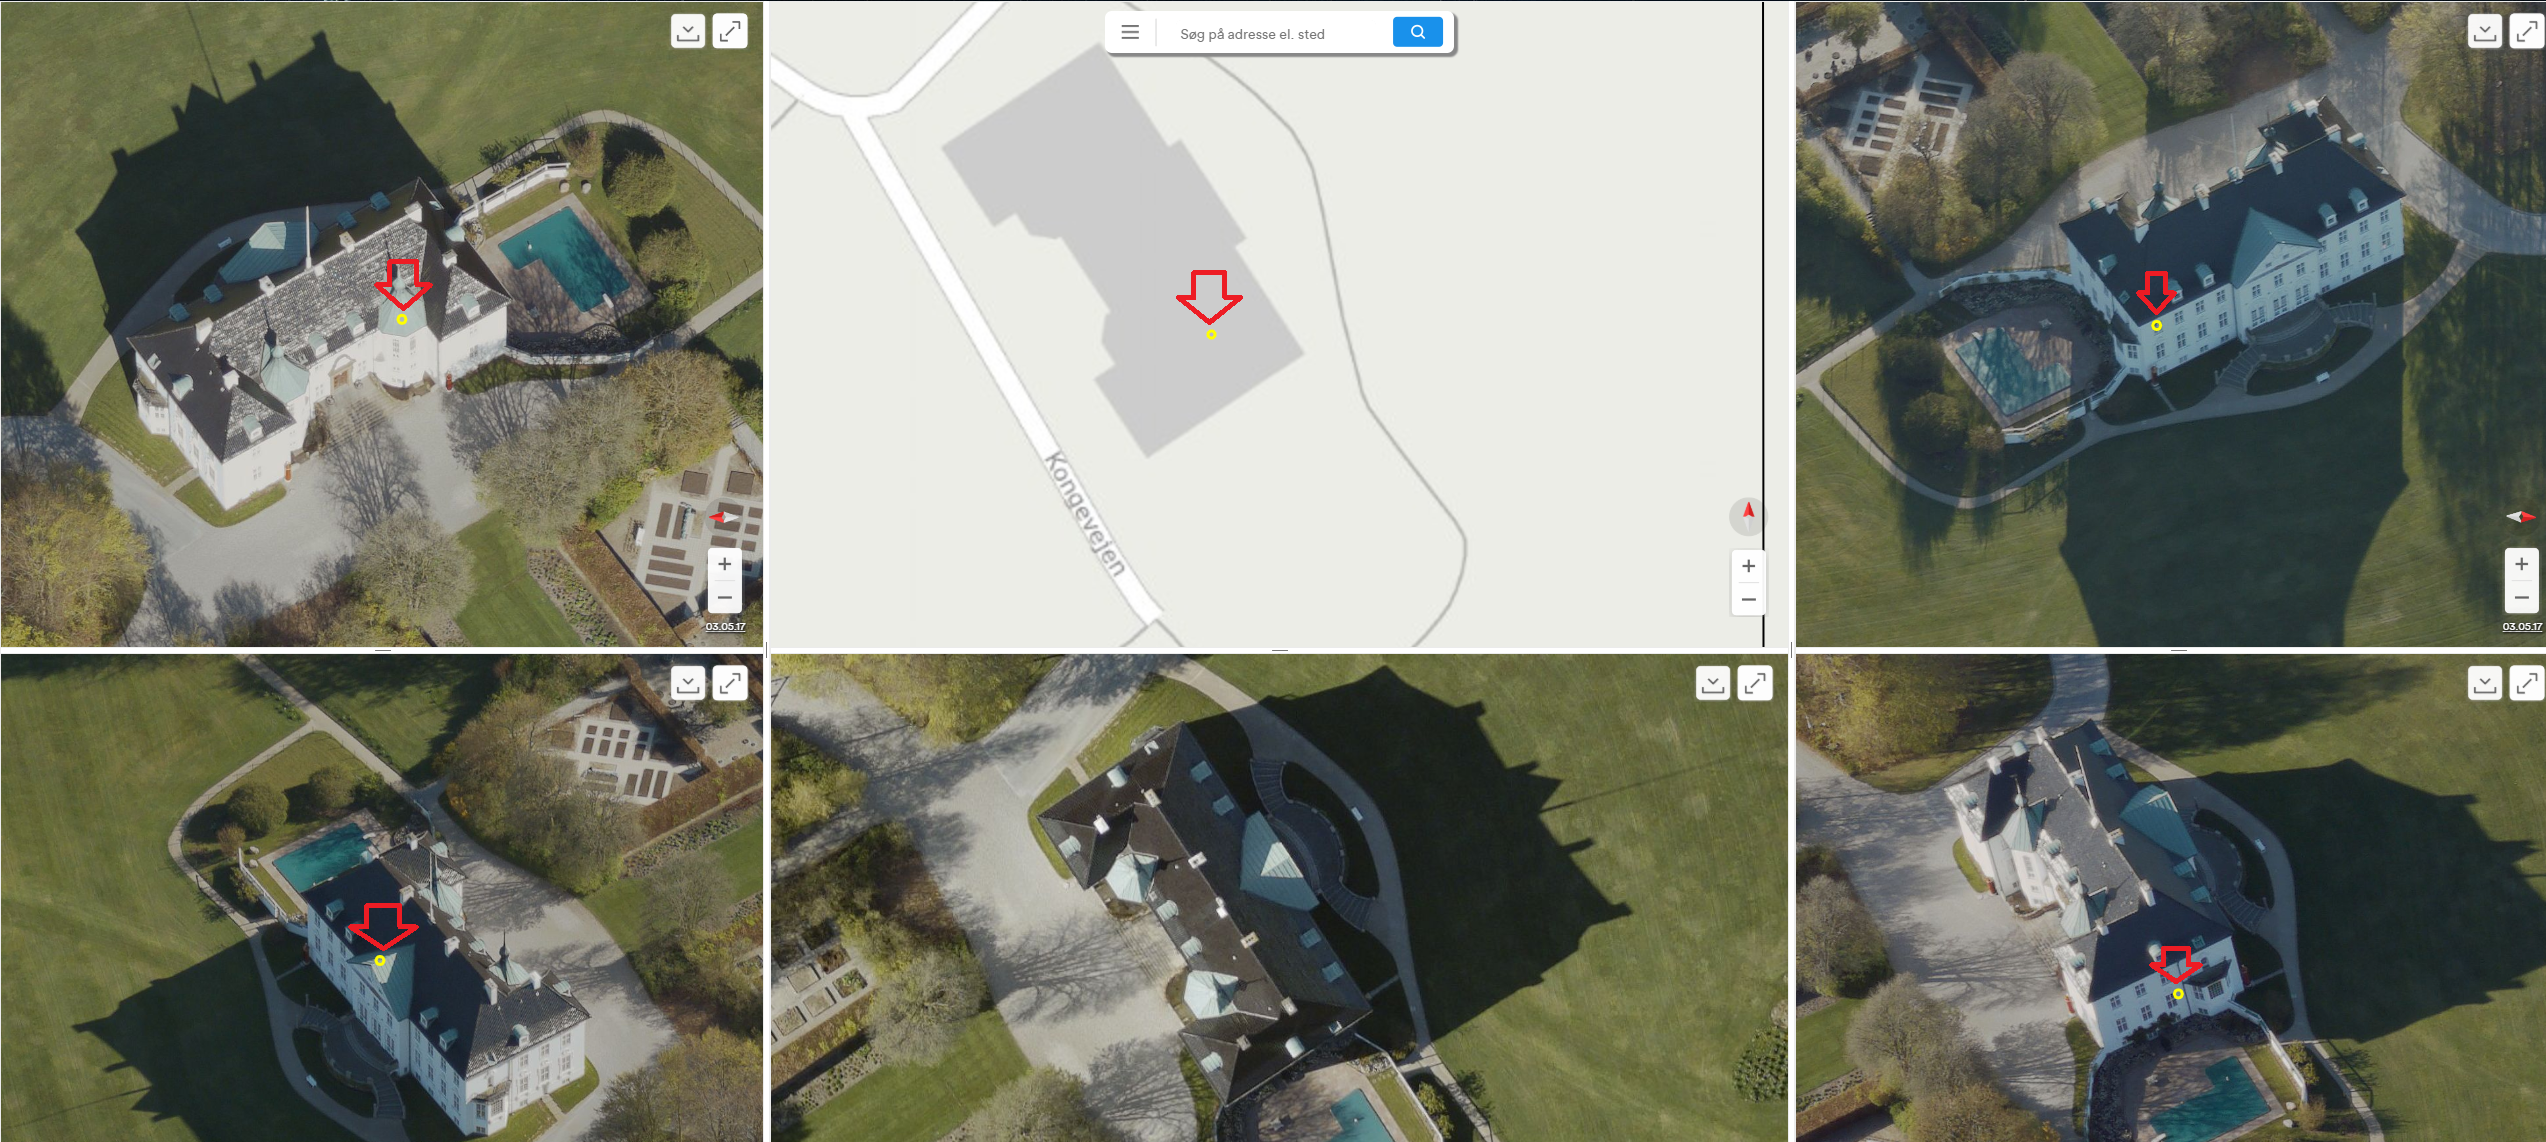 A screenshot from the application for viewing perspective imagery. 